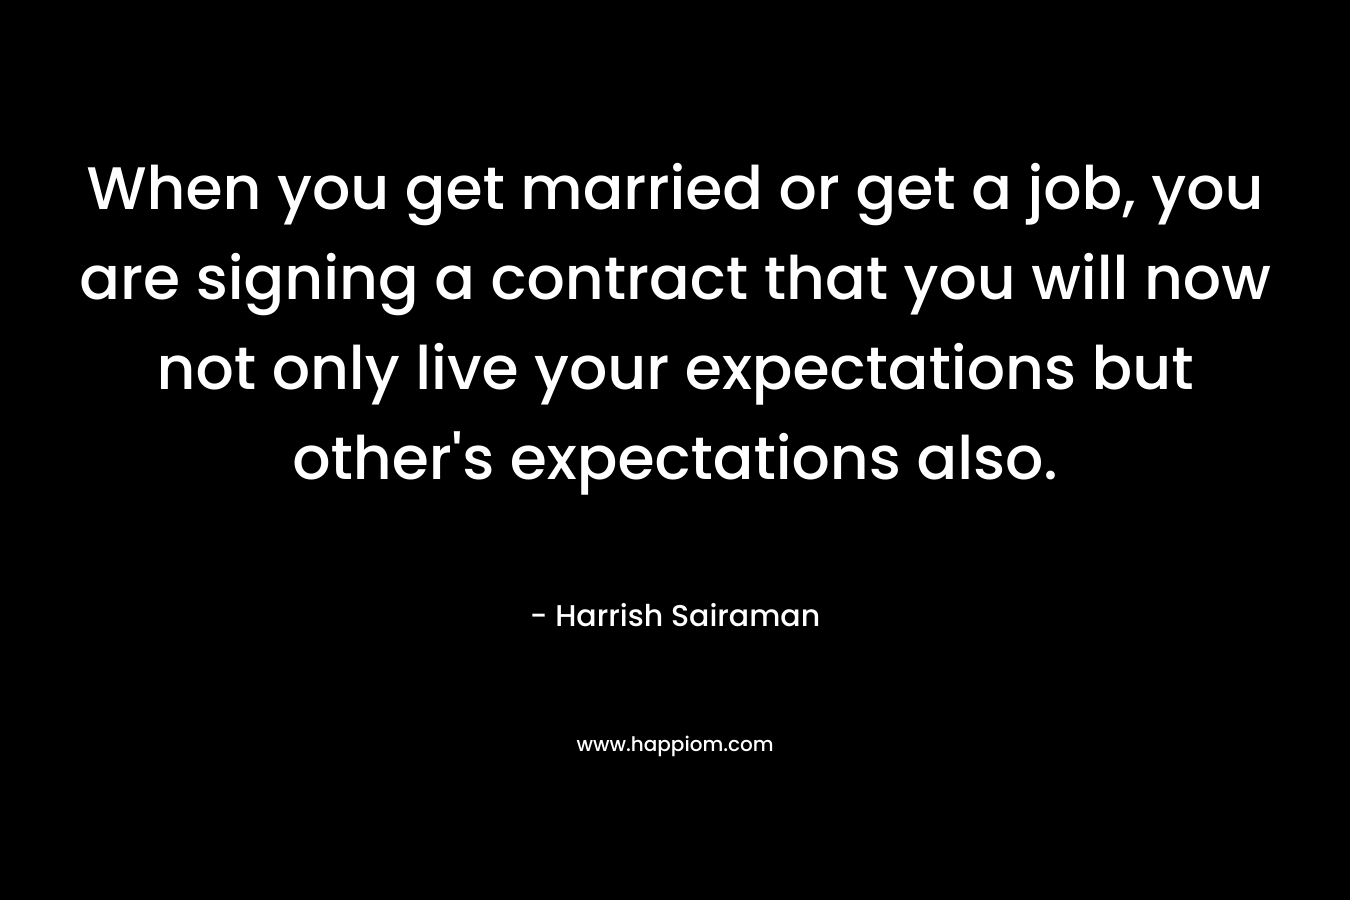 When you get married or get a job, you are signing a contract that you will now not only live your expectations but other’s expectations also. – Harrish Sairaman